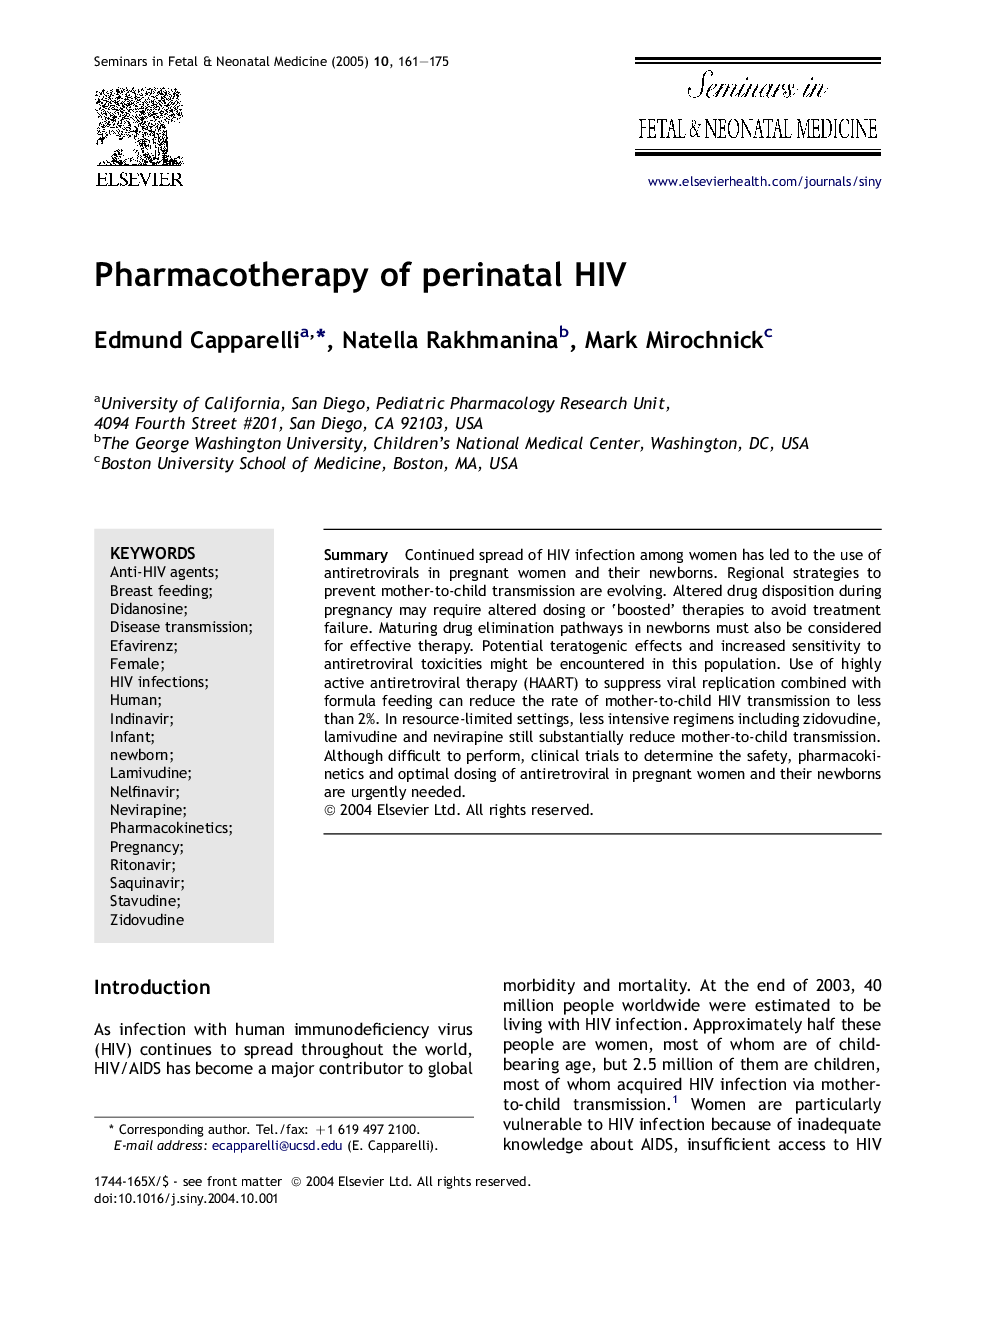 Pharmacotherapy of perinatal HIV